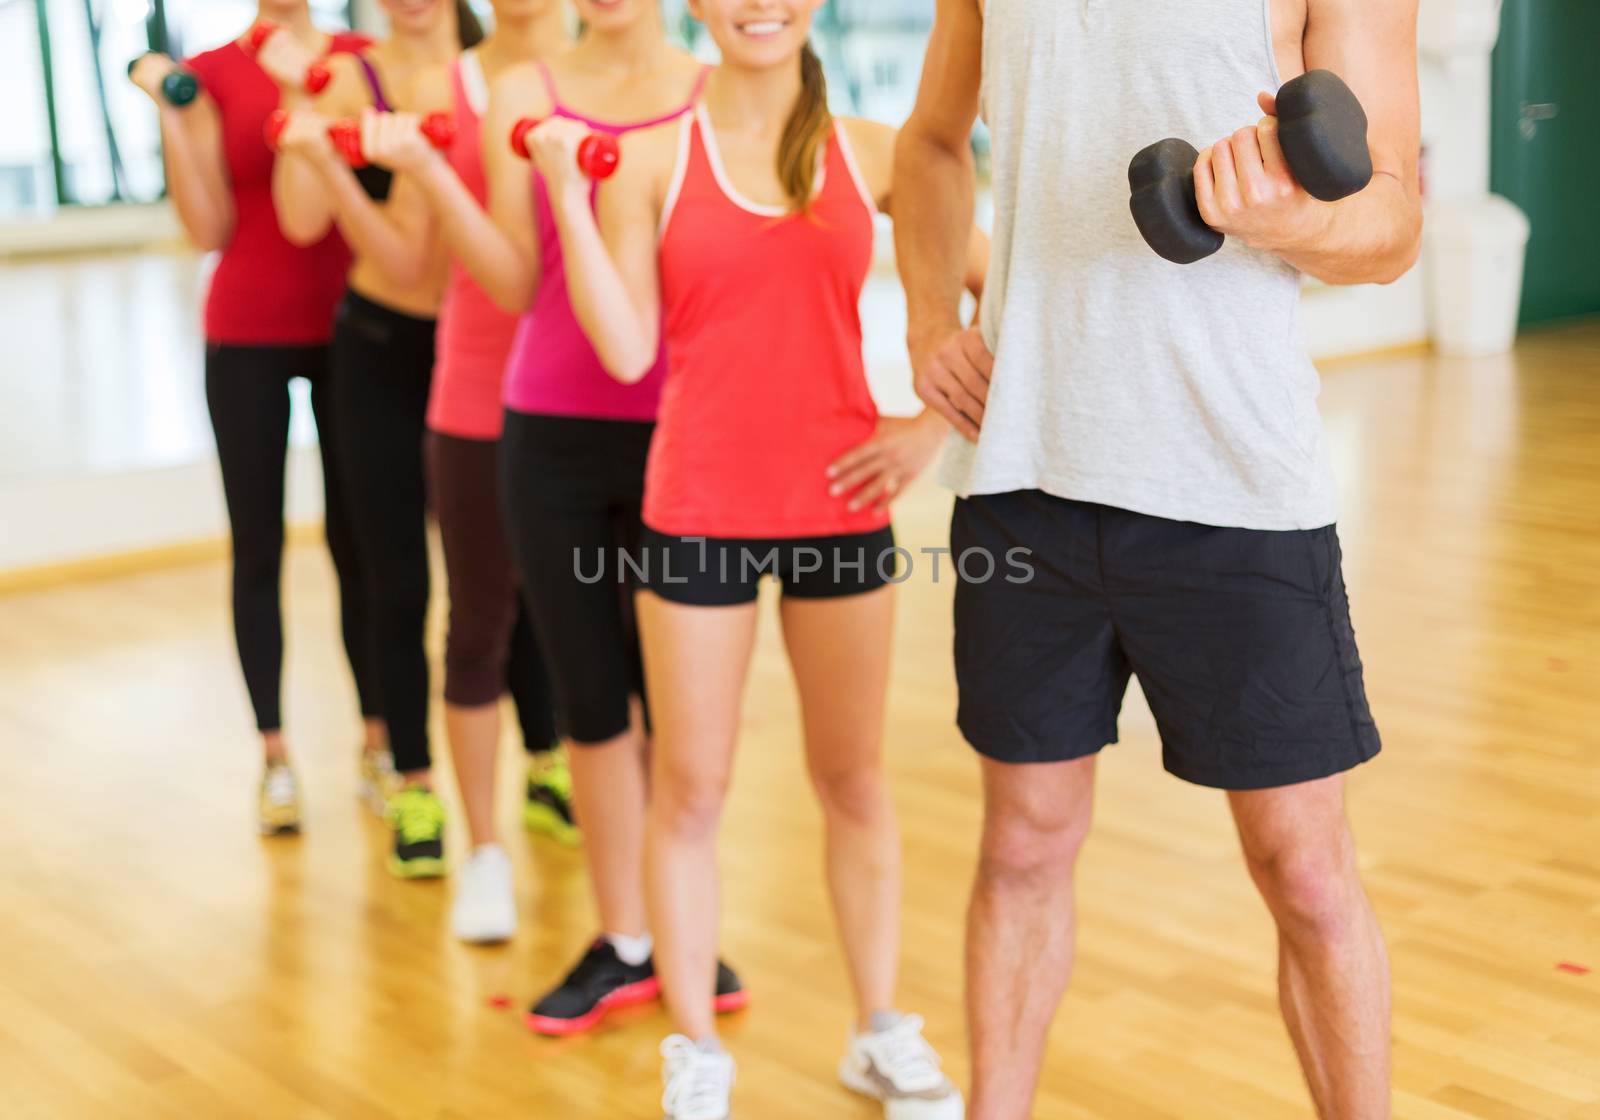 fitness, sport, training, gym and lifestyle concept - group of people working out with dumbbells in the gym